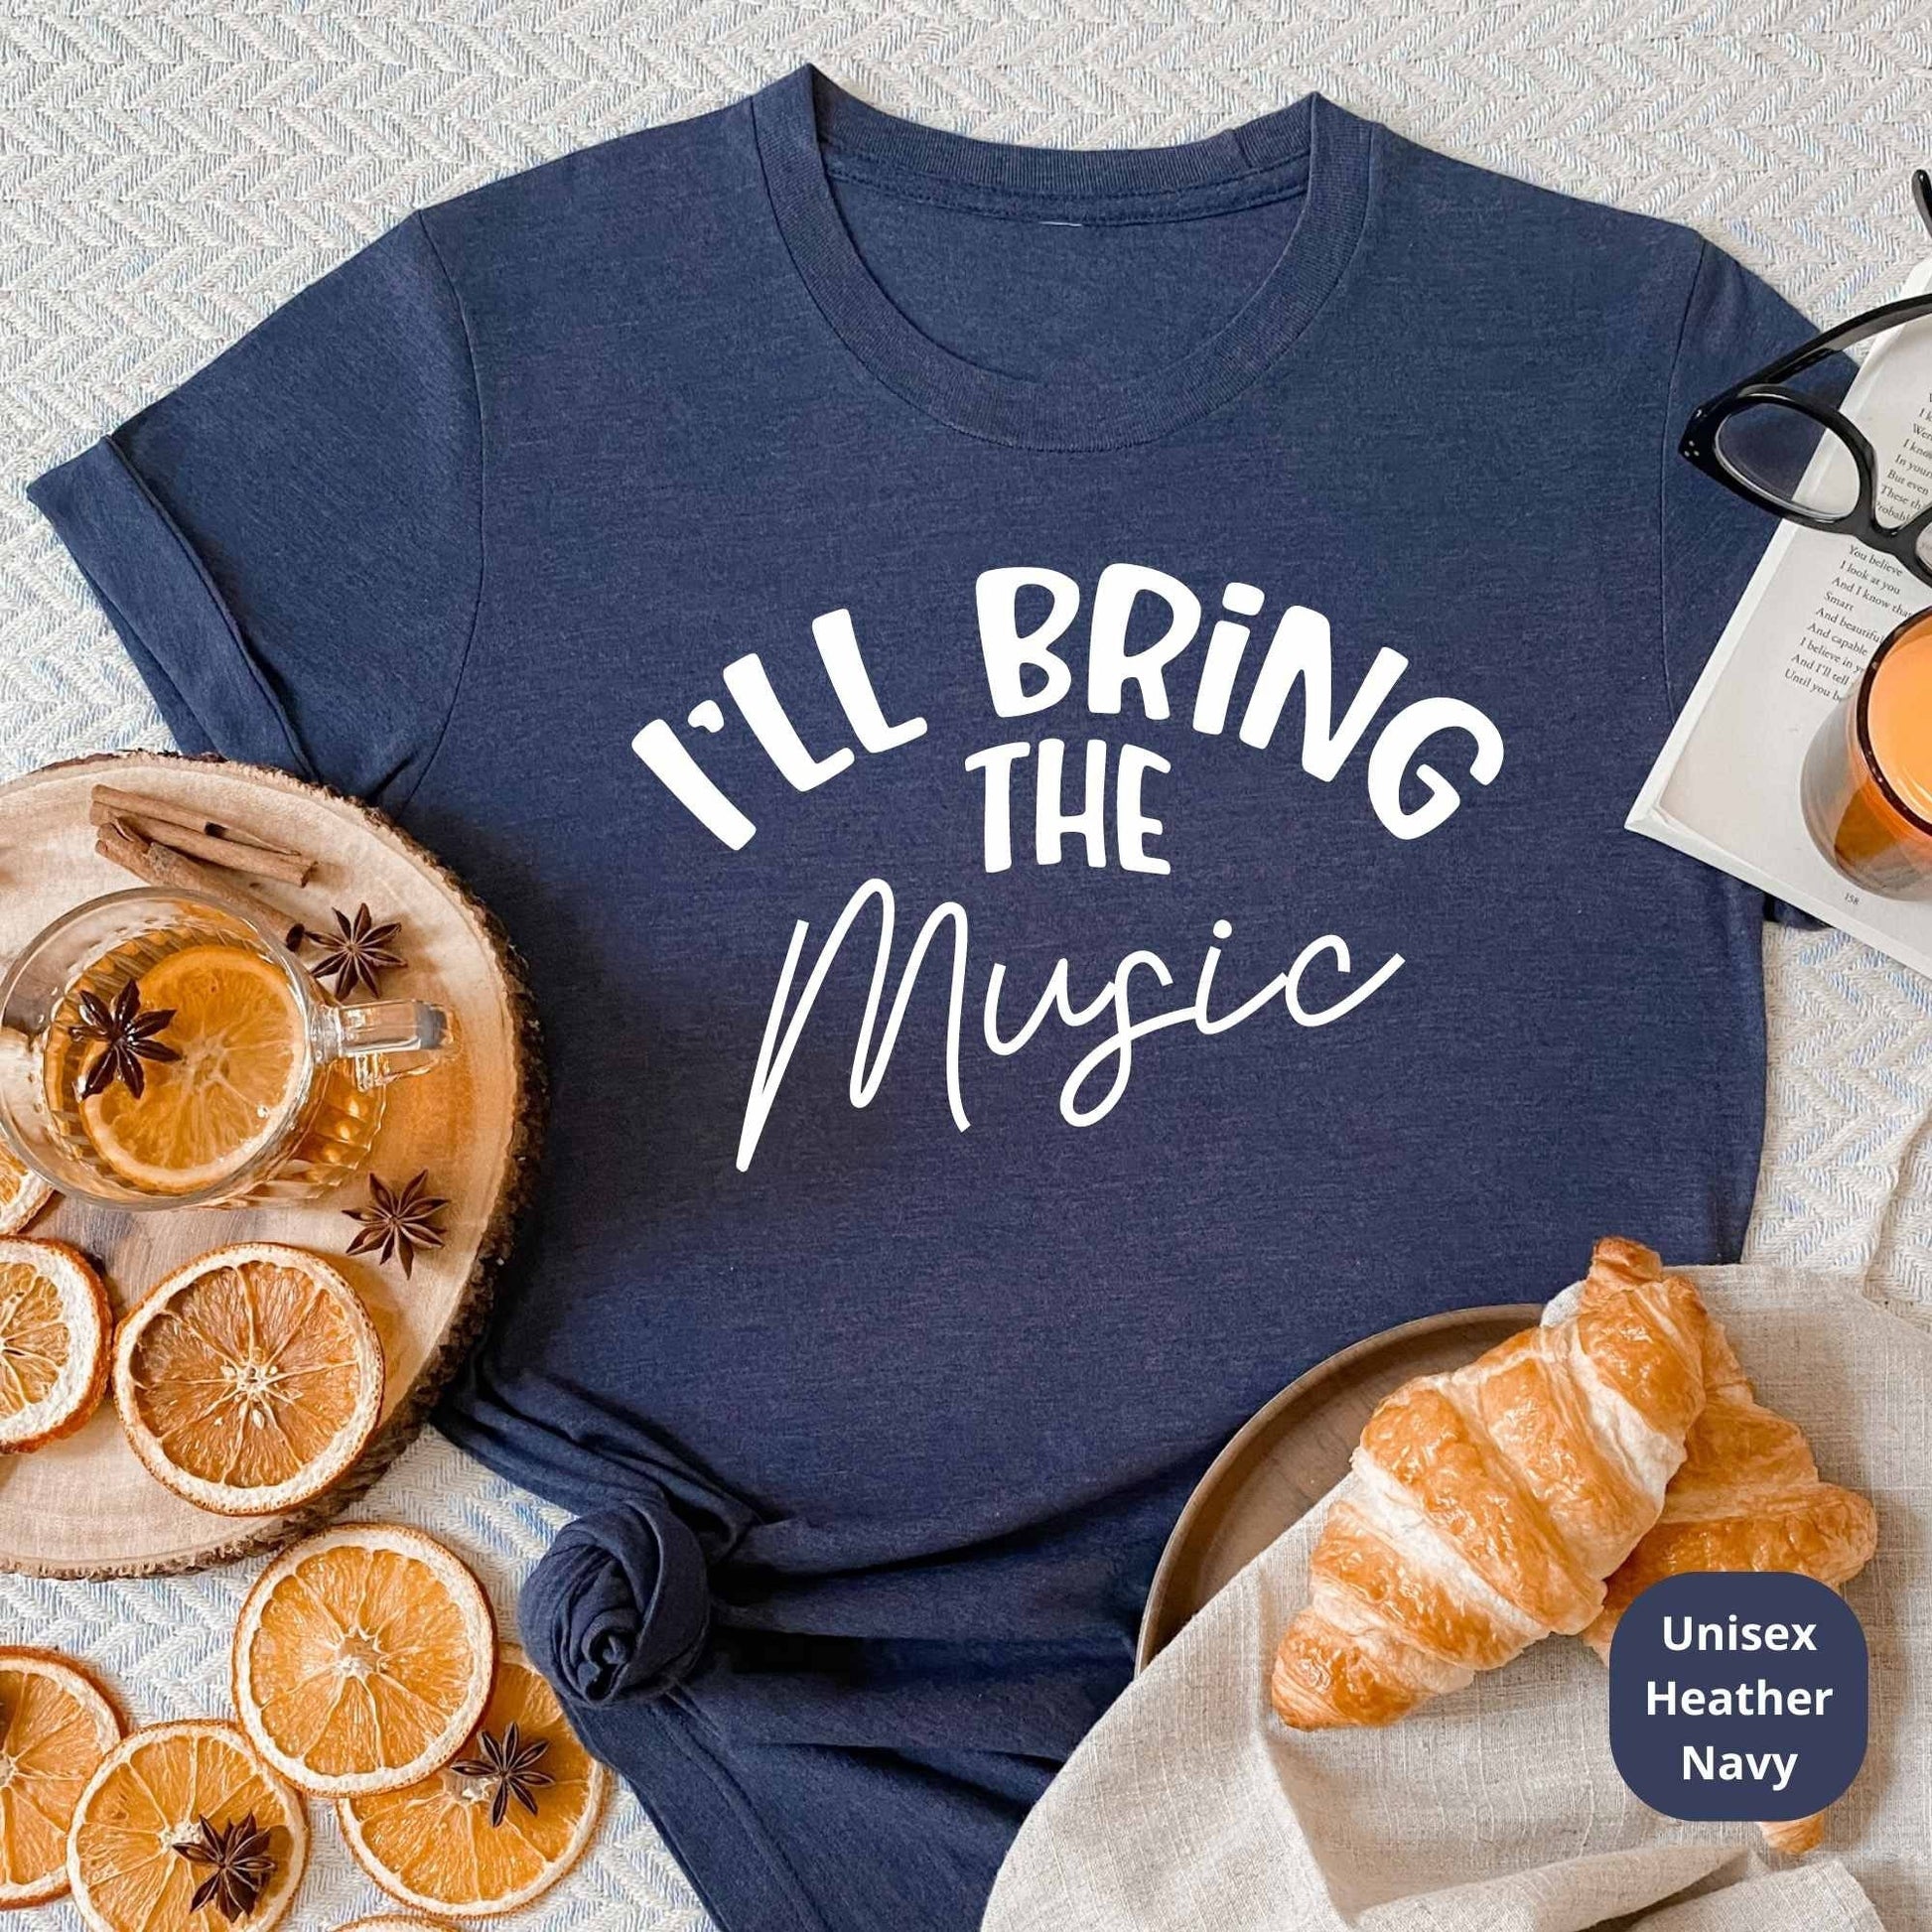 40th Birthday Shirts, I'll Bring The.. | Funny 40th Birthday Gifts for Party HMDesignStudioUS